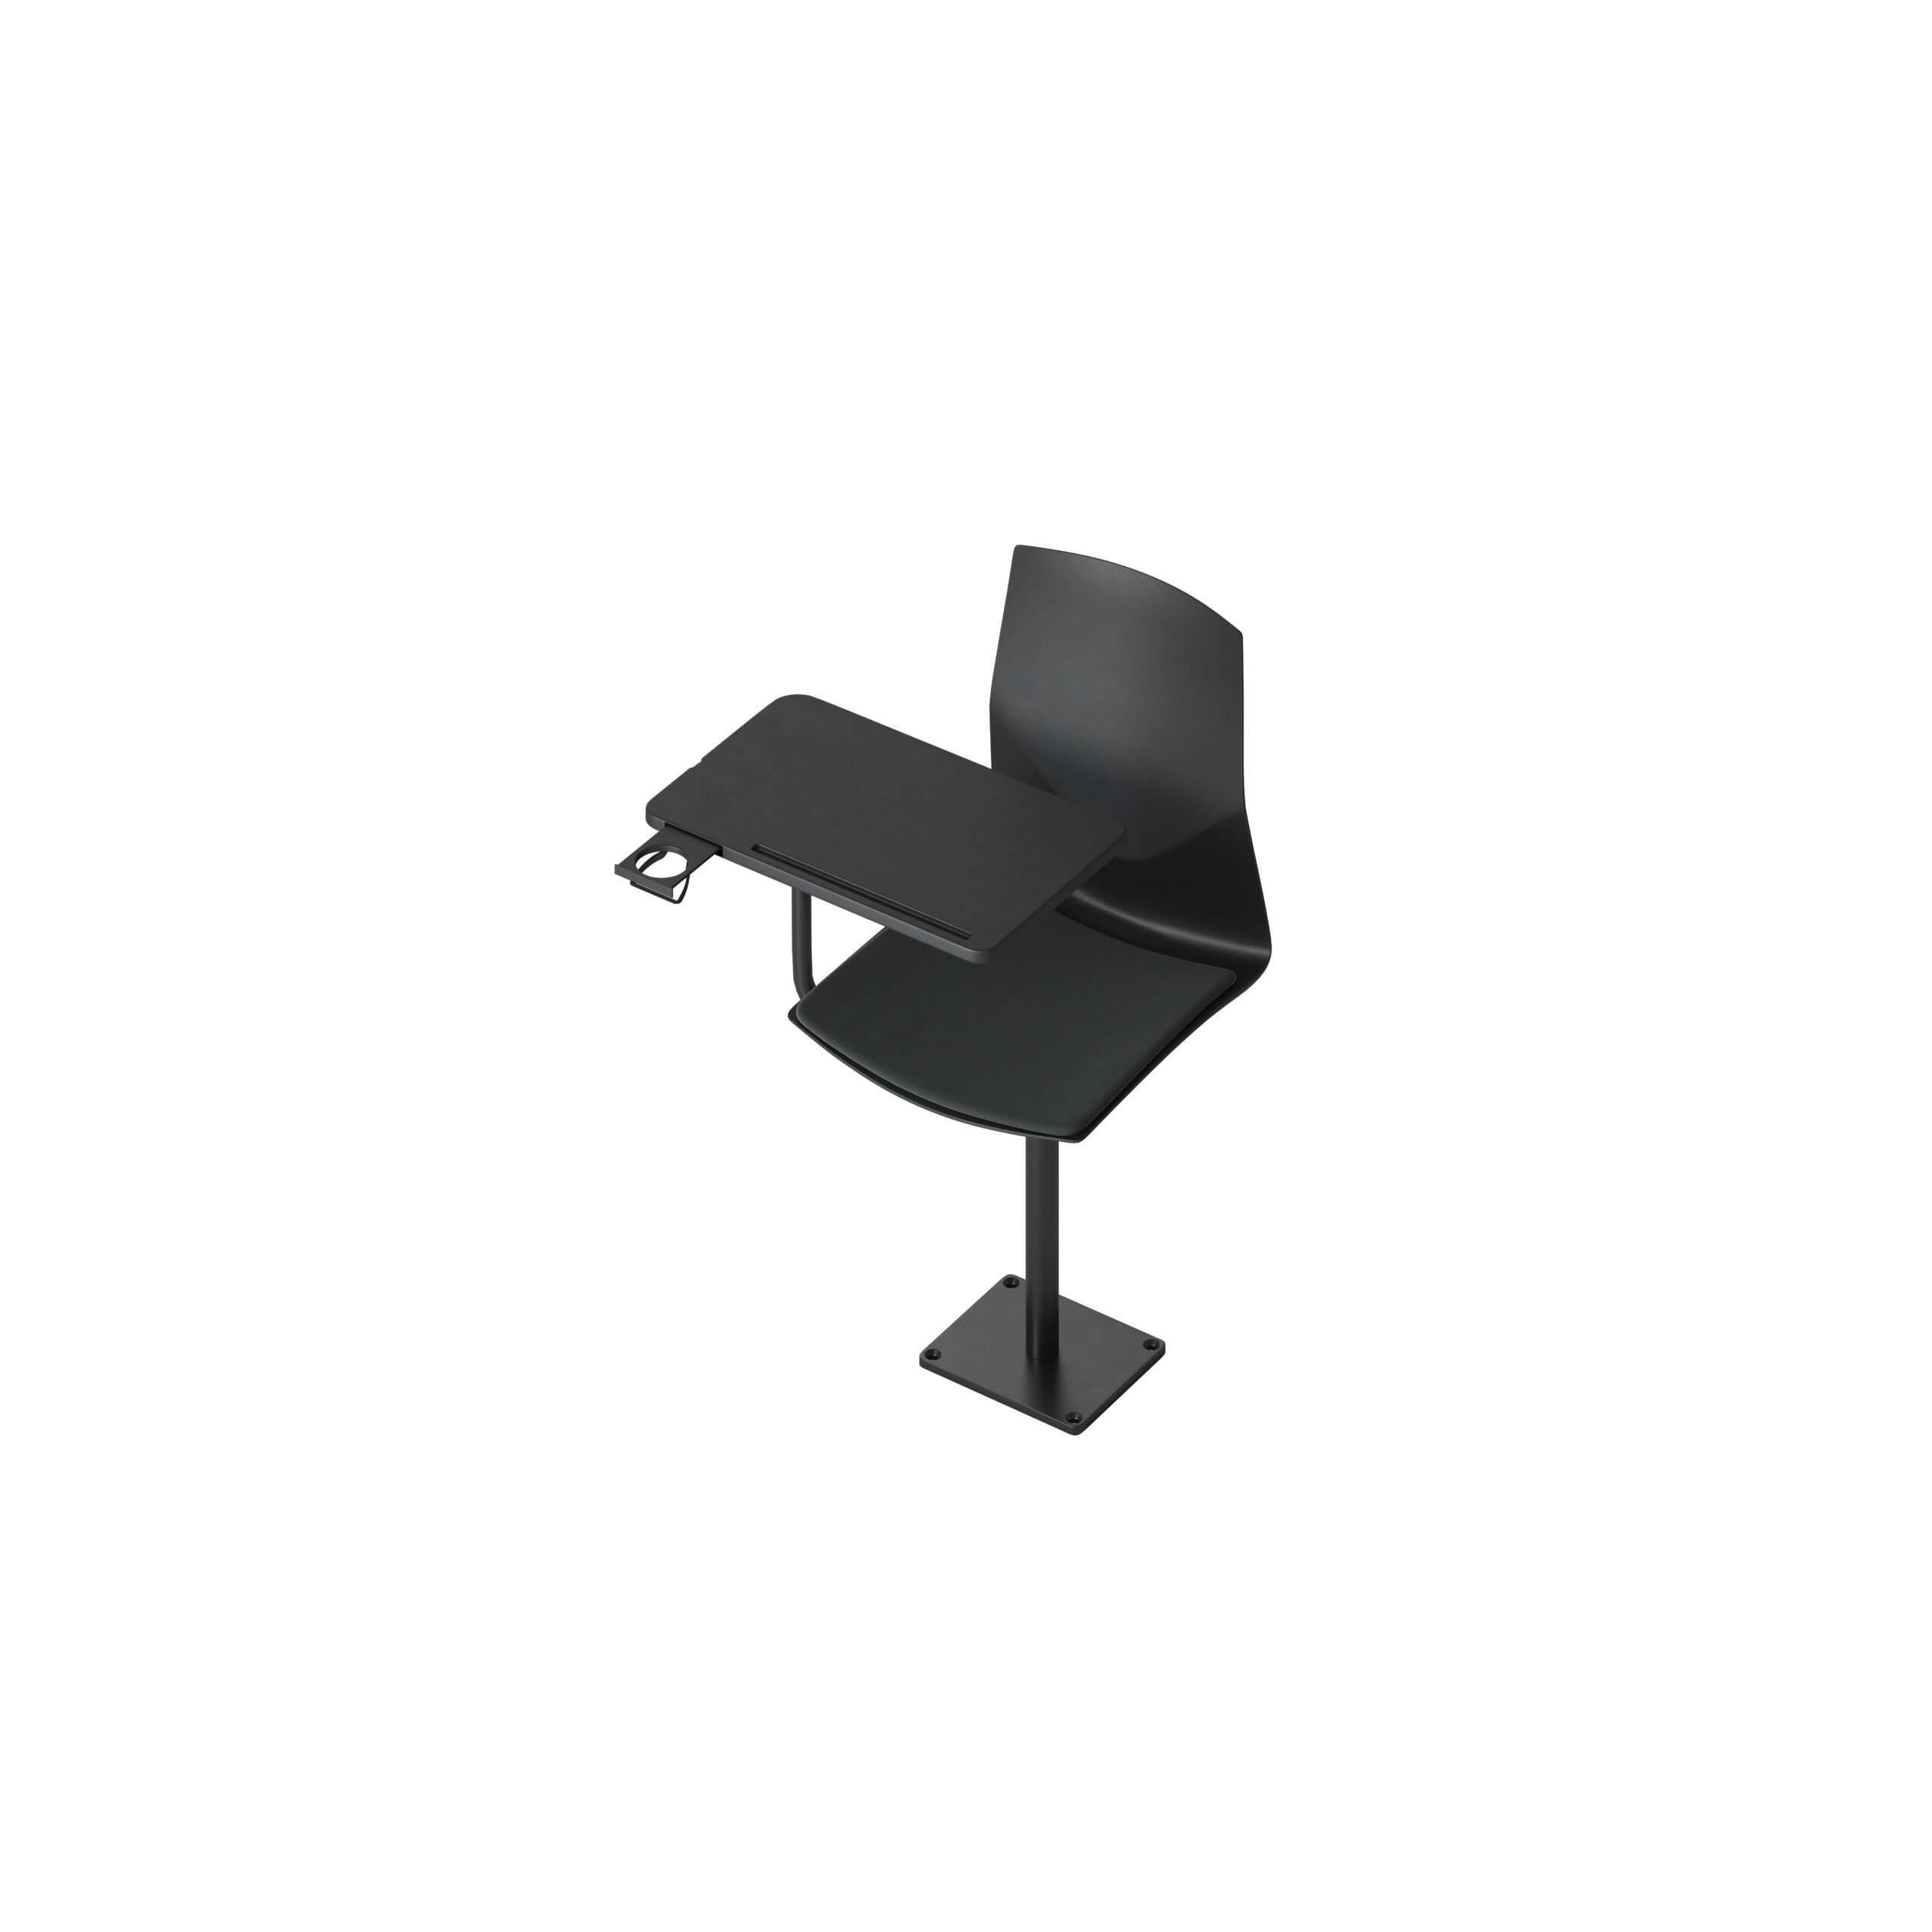 OCEE&FOUR - Chairs - FourCast2 Audi - Plastic shell - Seat Pad - Innotab - Swivel Frame - Packshot Image 3